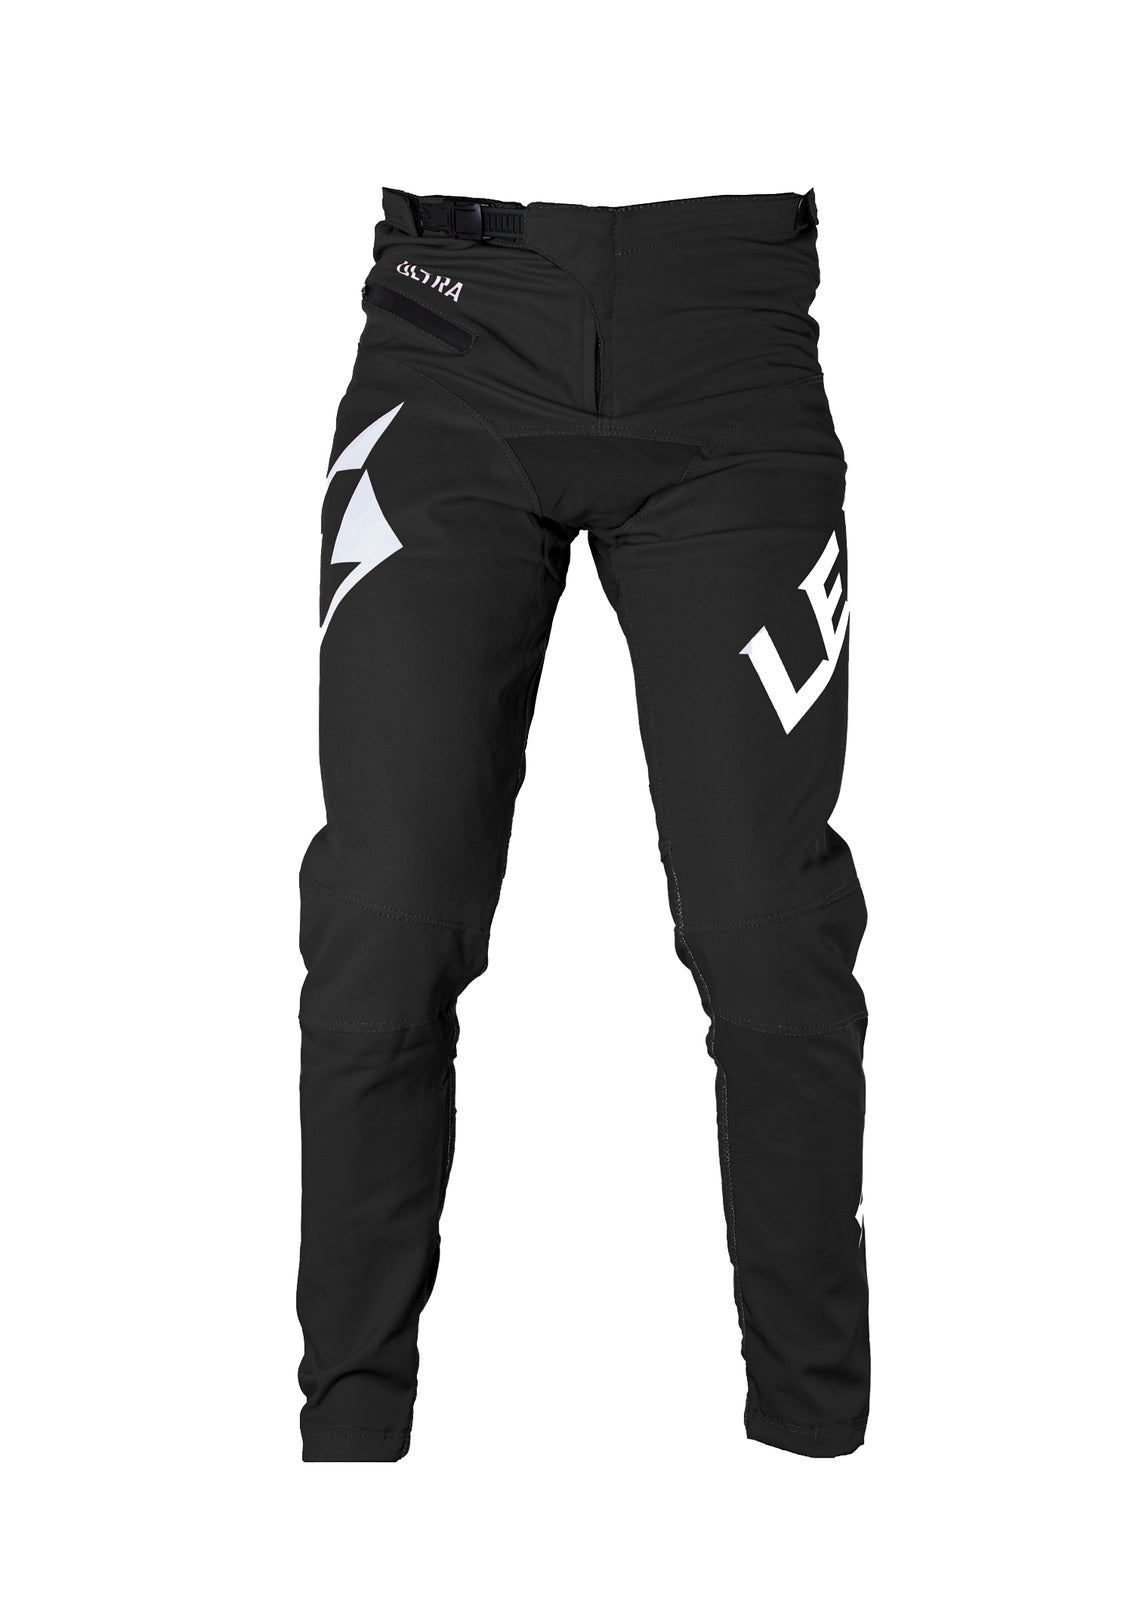 A pair of Lead Ultra Youth Pant with a white logo, perfect for racing enthusiasts looking for fitted race wear that reduces drag.